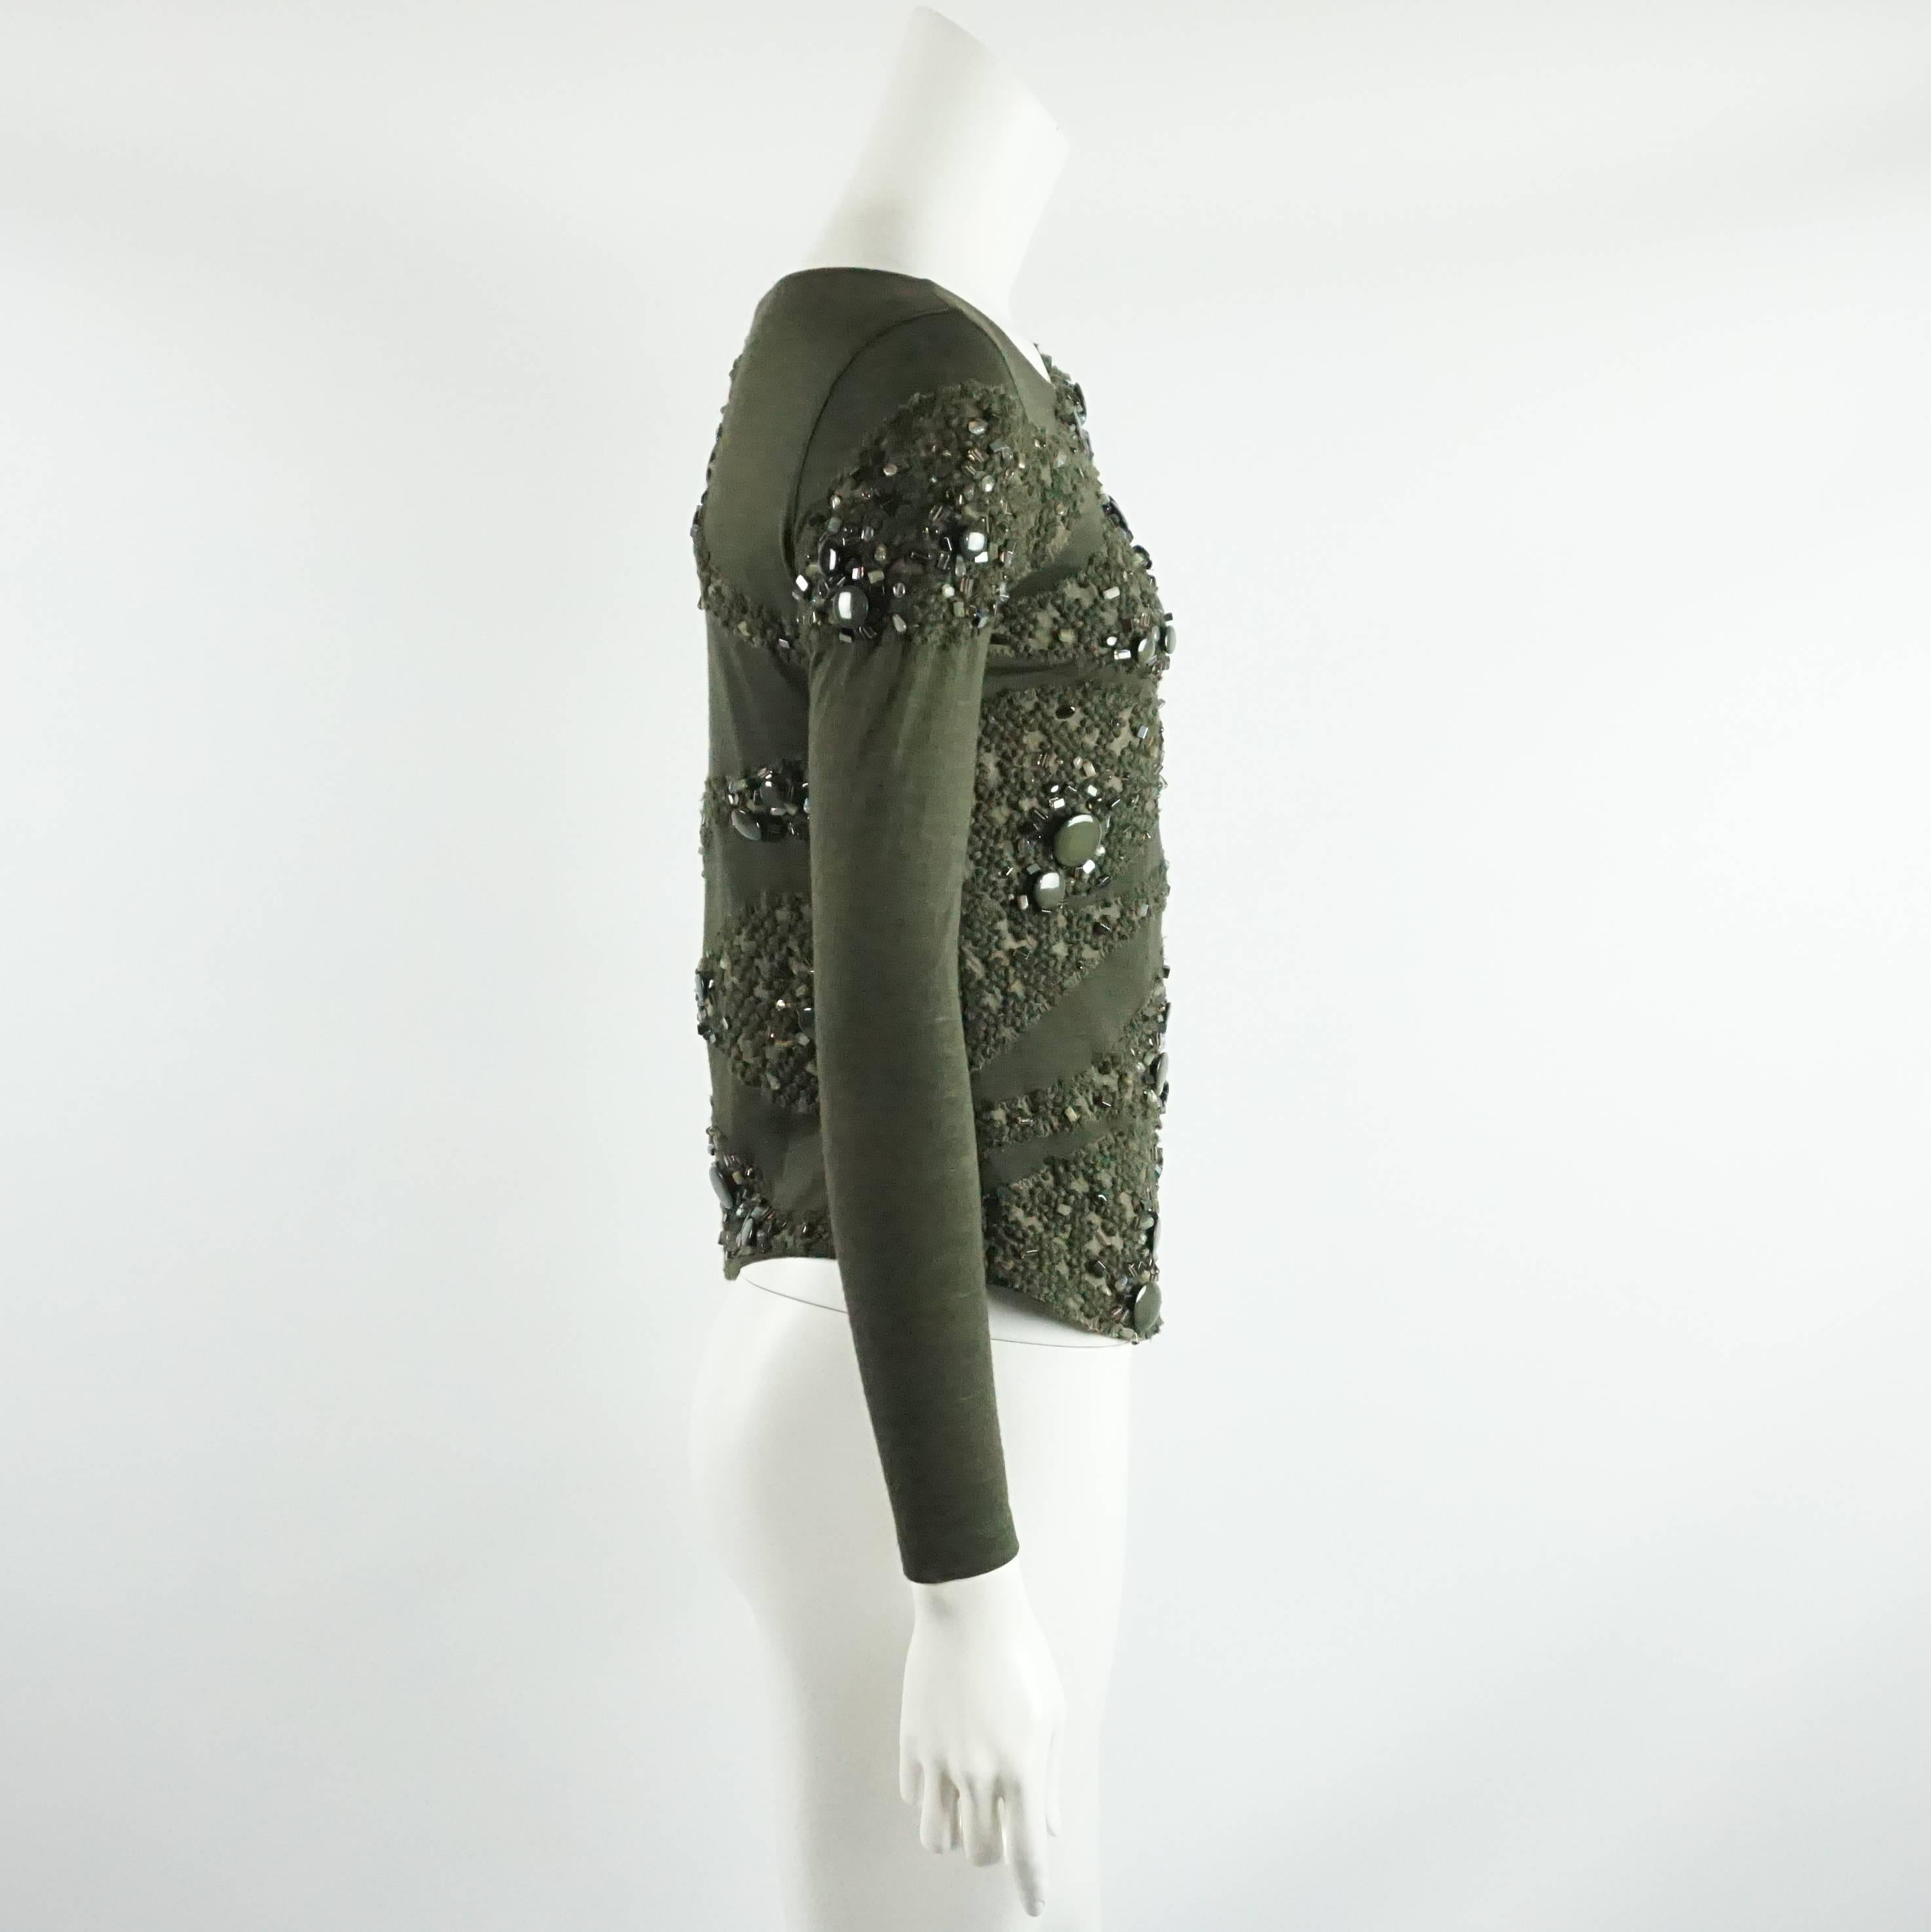 This army green long sleeved Akris top has a side zipper. It has a continuous applique with crystals, beads, and stones. This top is in excellent condition with one loose stone.

Measurements
Shoulder to Shoulder: 14